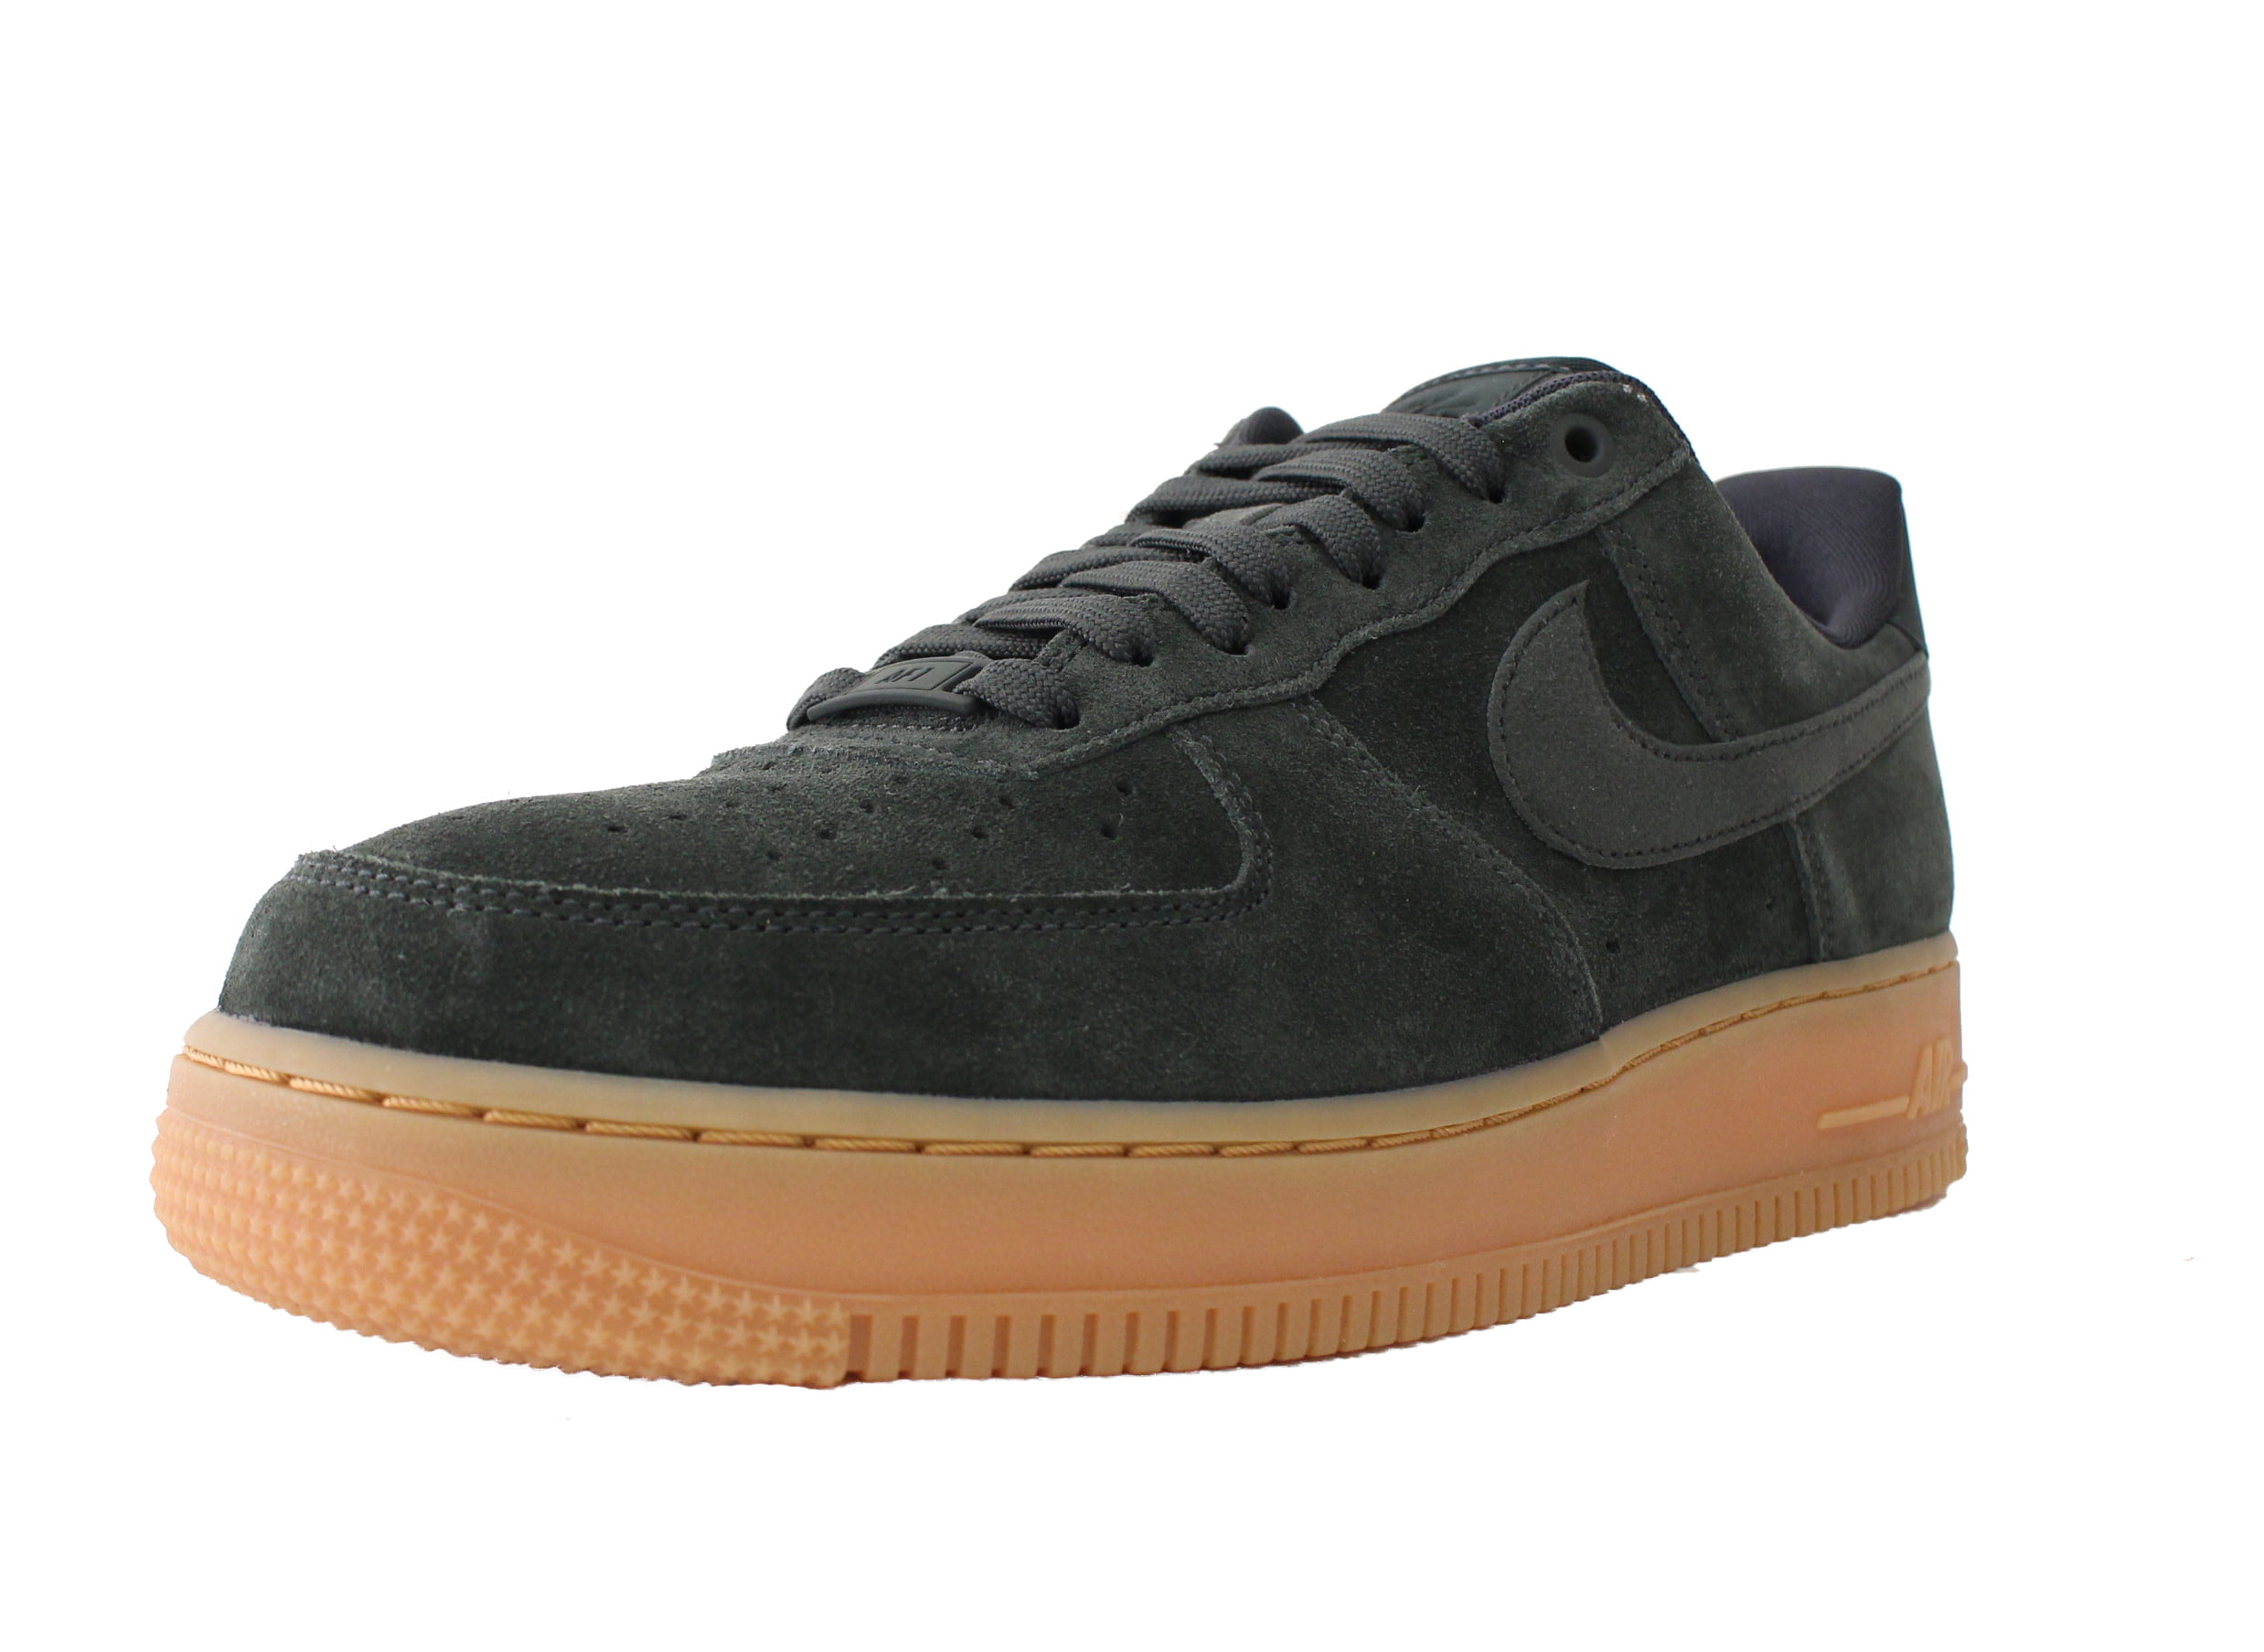 NIKE AIR FORCE 1 LOW 07 LV8 SUEDE SZ 11 OUTDOOR GREEN GUM BOTTOM